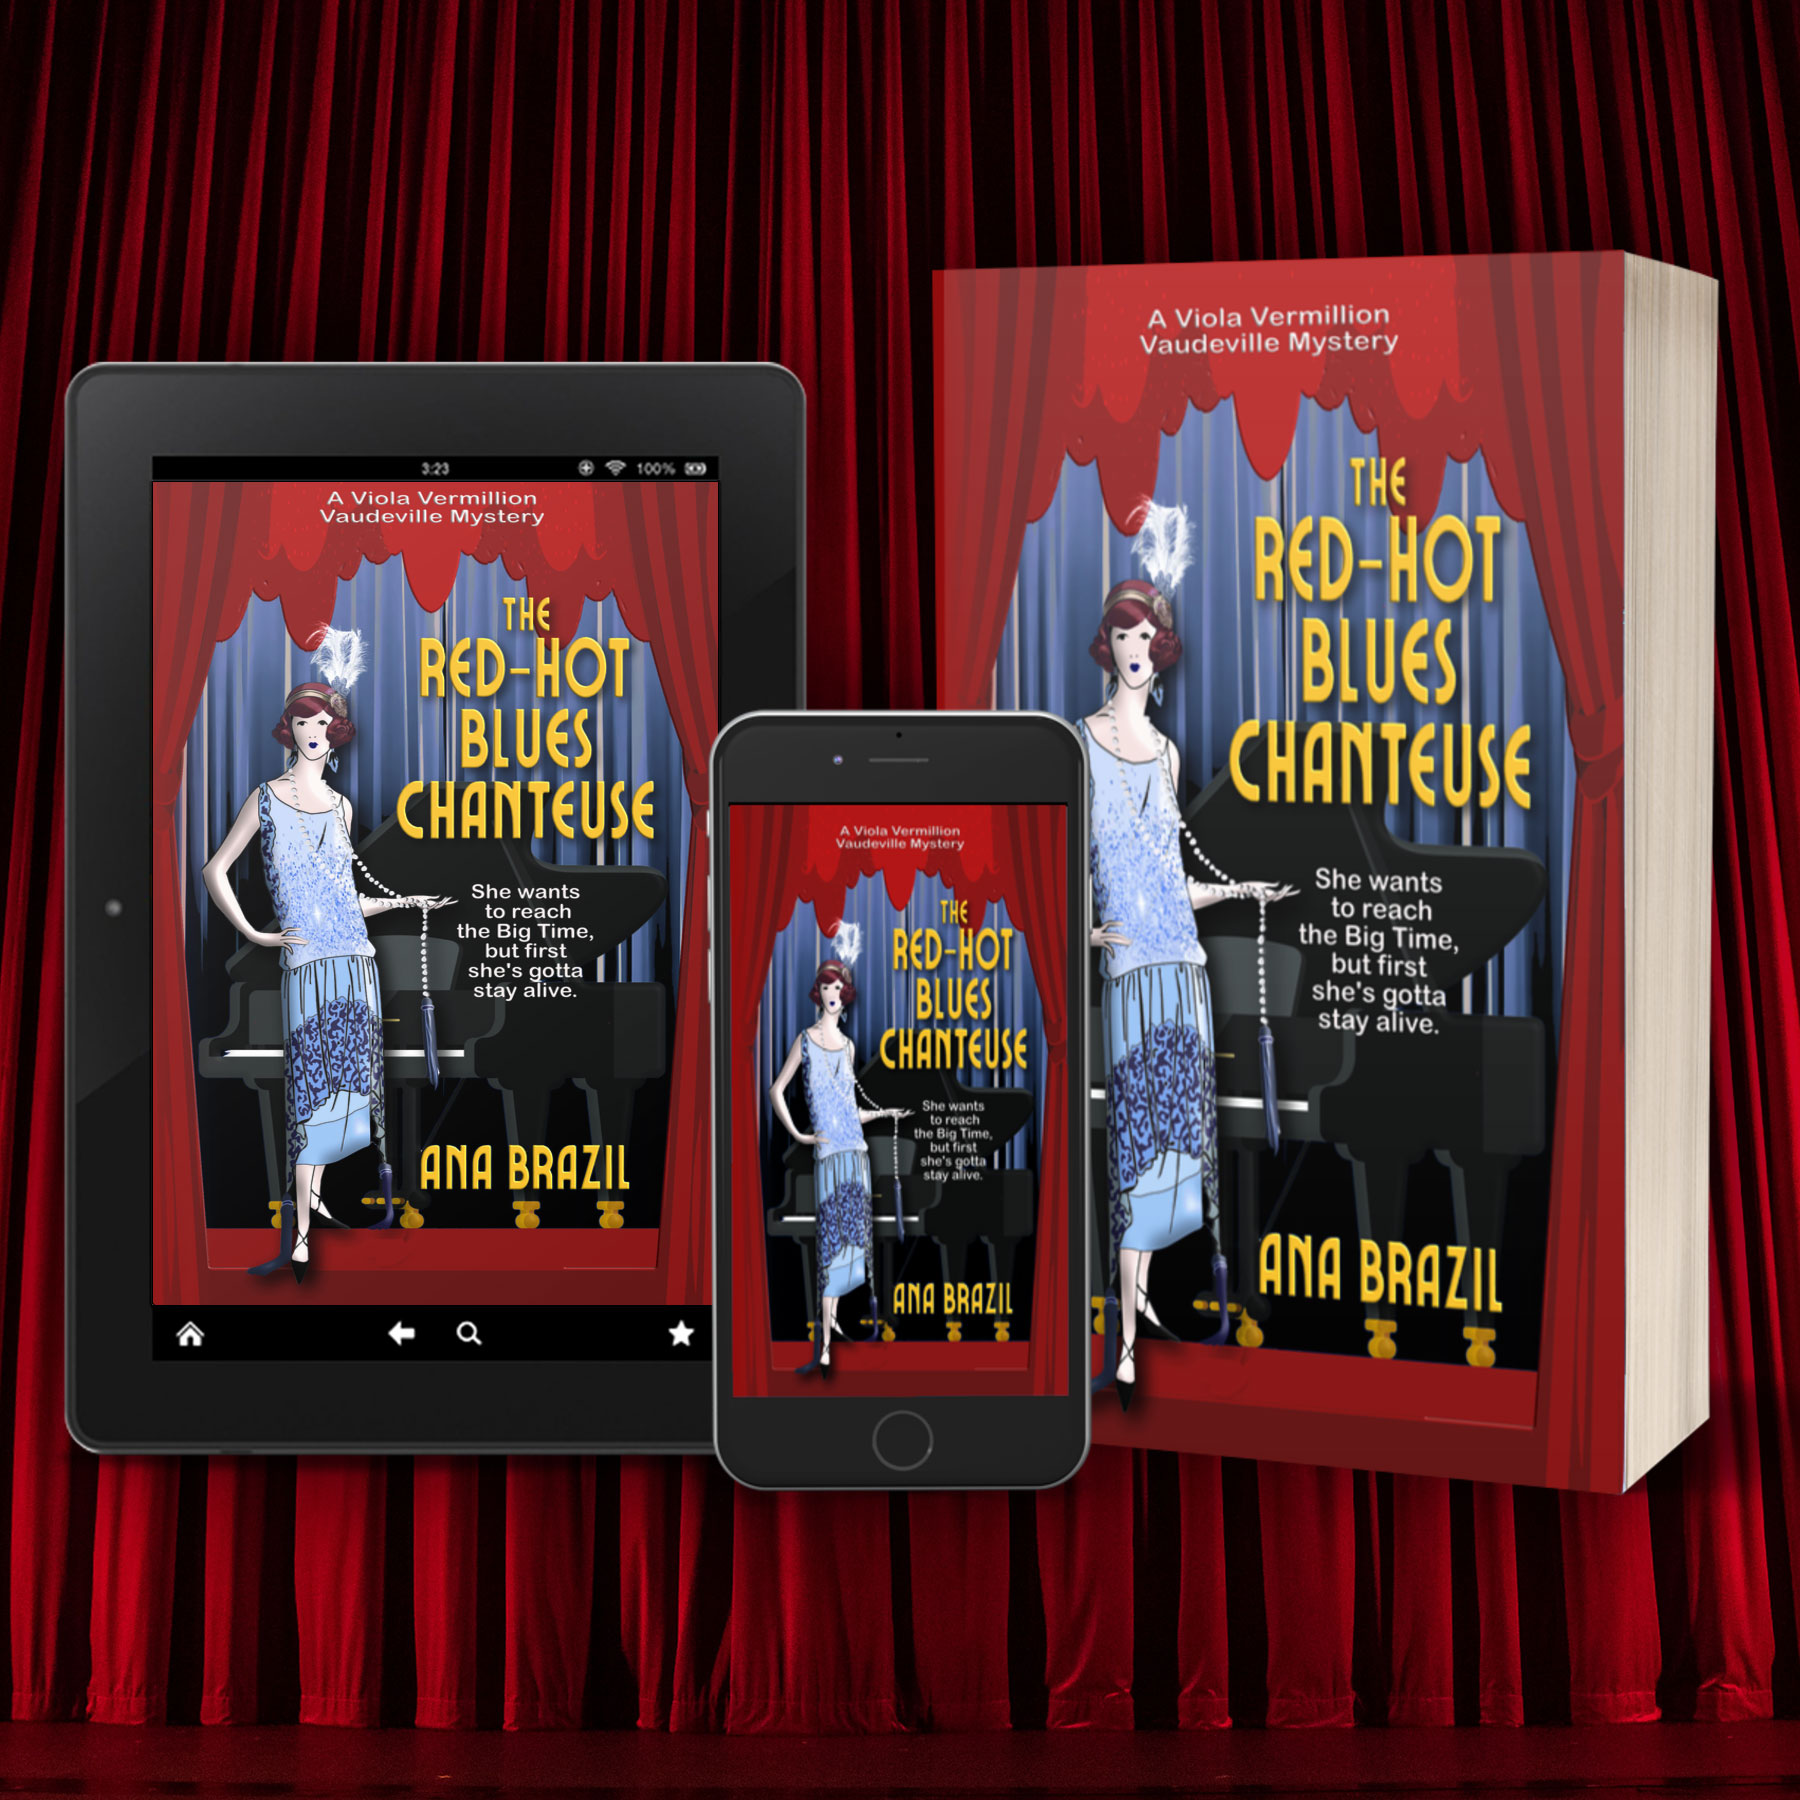 THE RED-HOT BLUES CHANTEUSE Release Day!